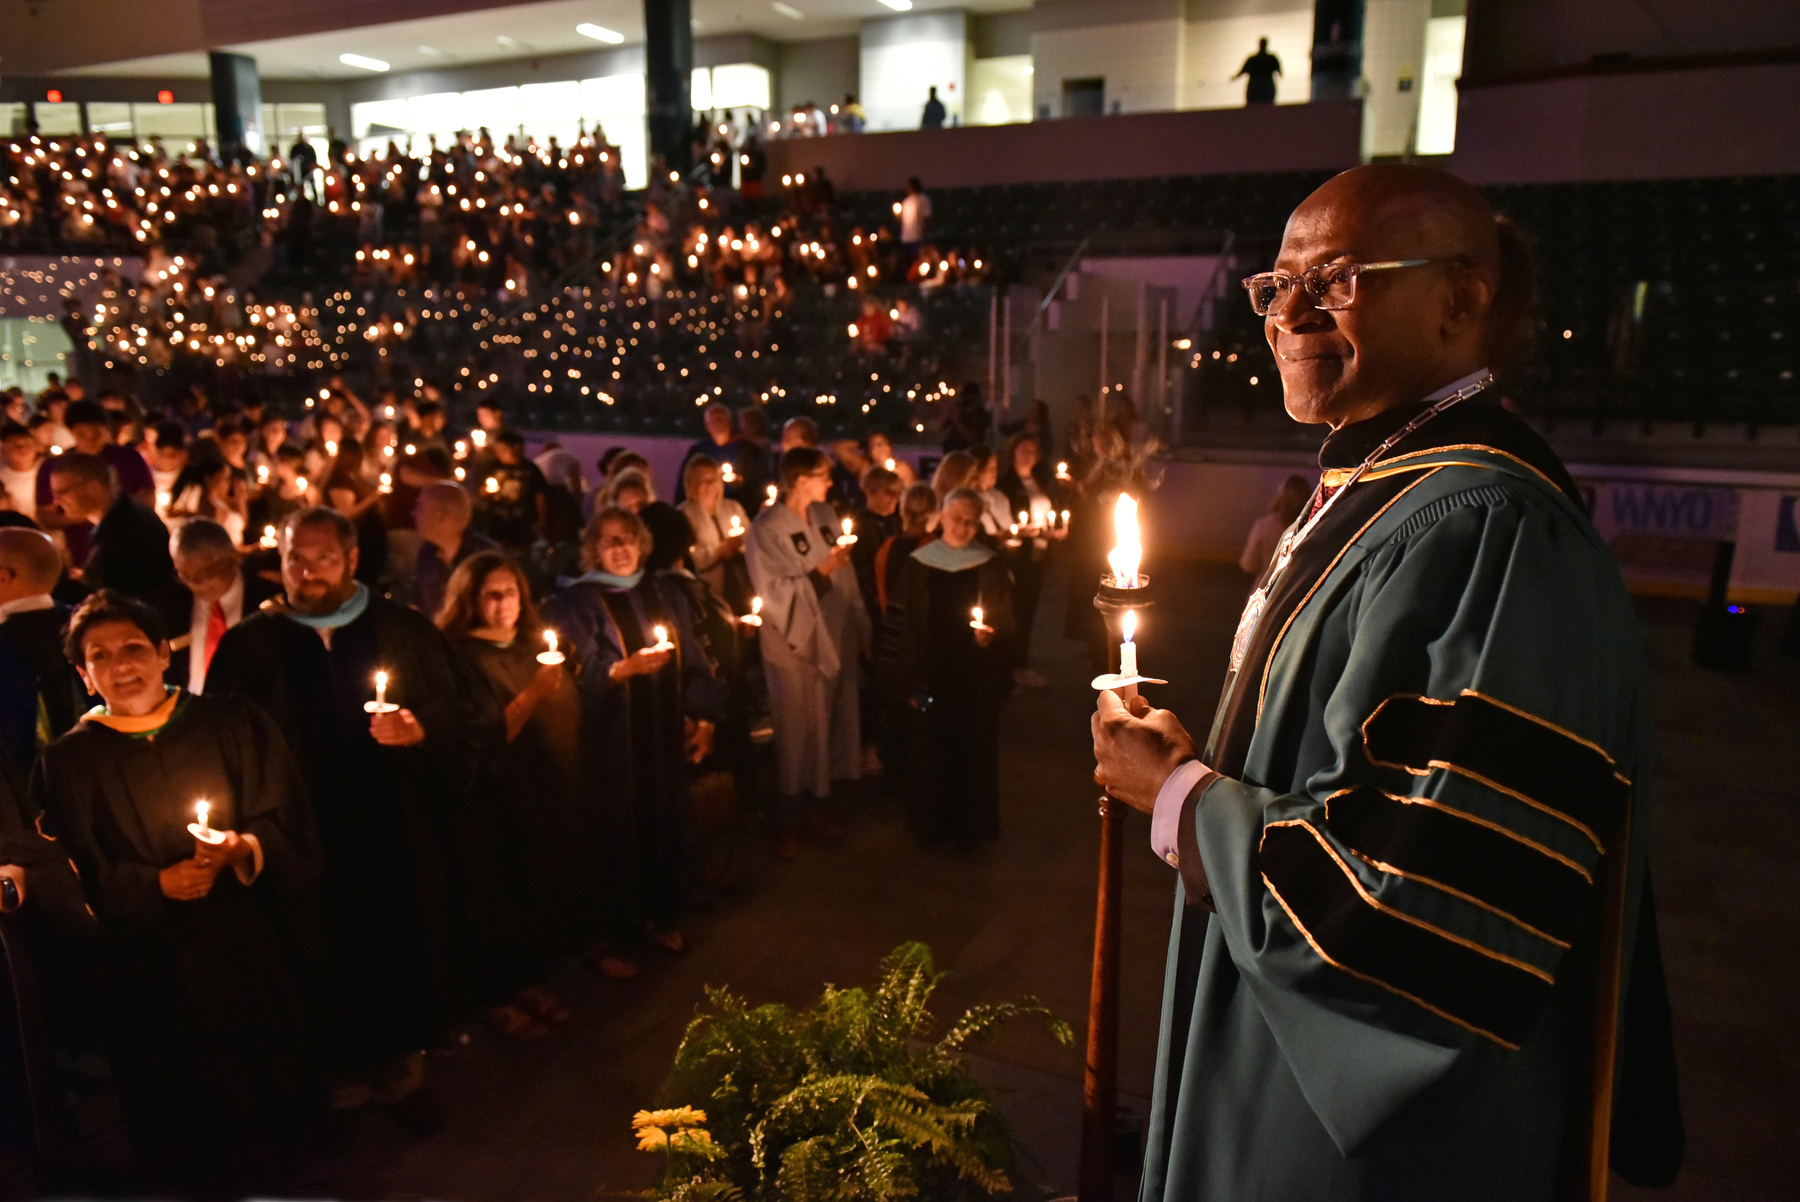 President Peter O. Nwosu stands on the platform as candles are lit during the Welcoming Torchlight Ceremony